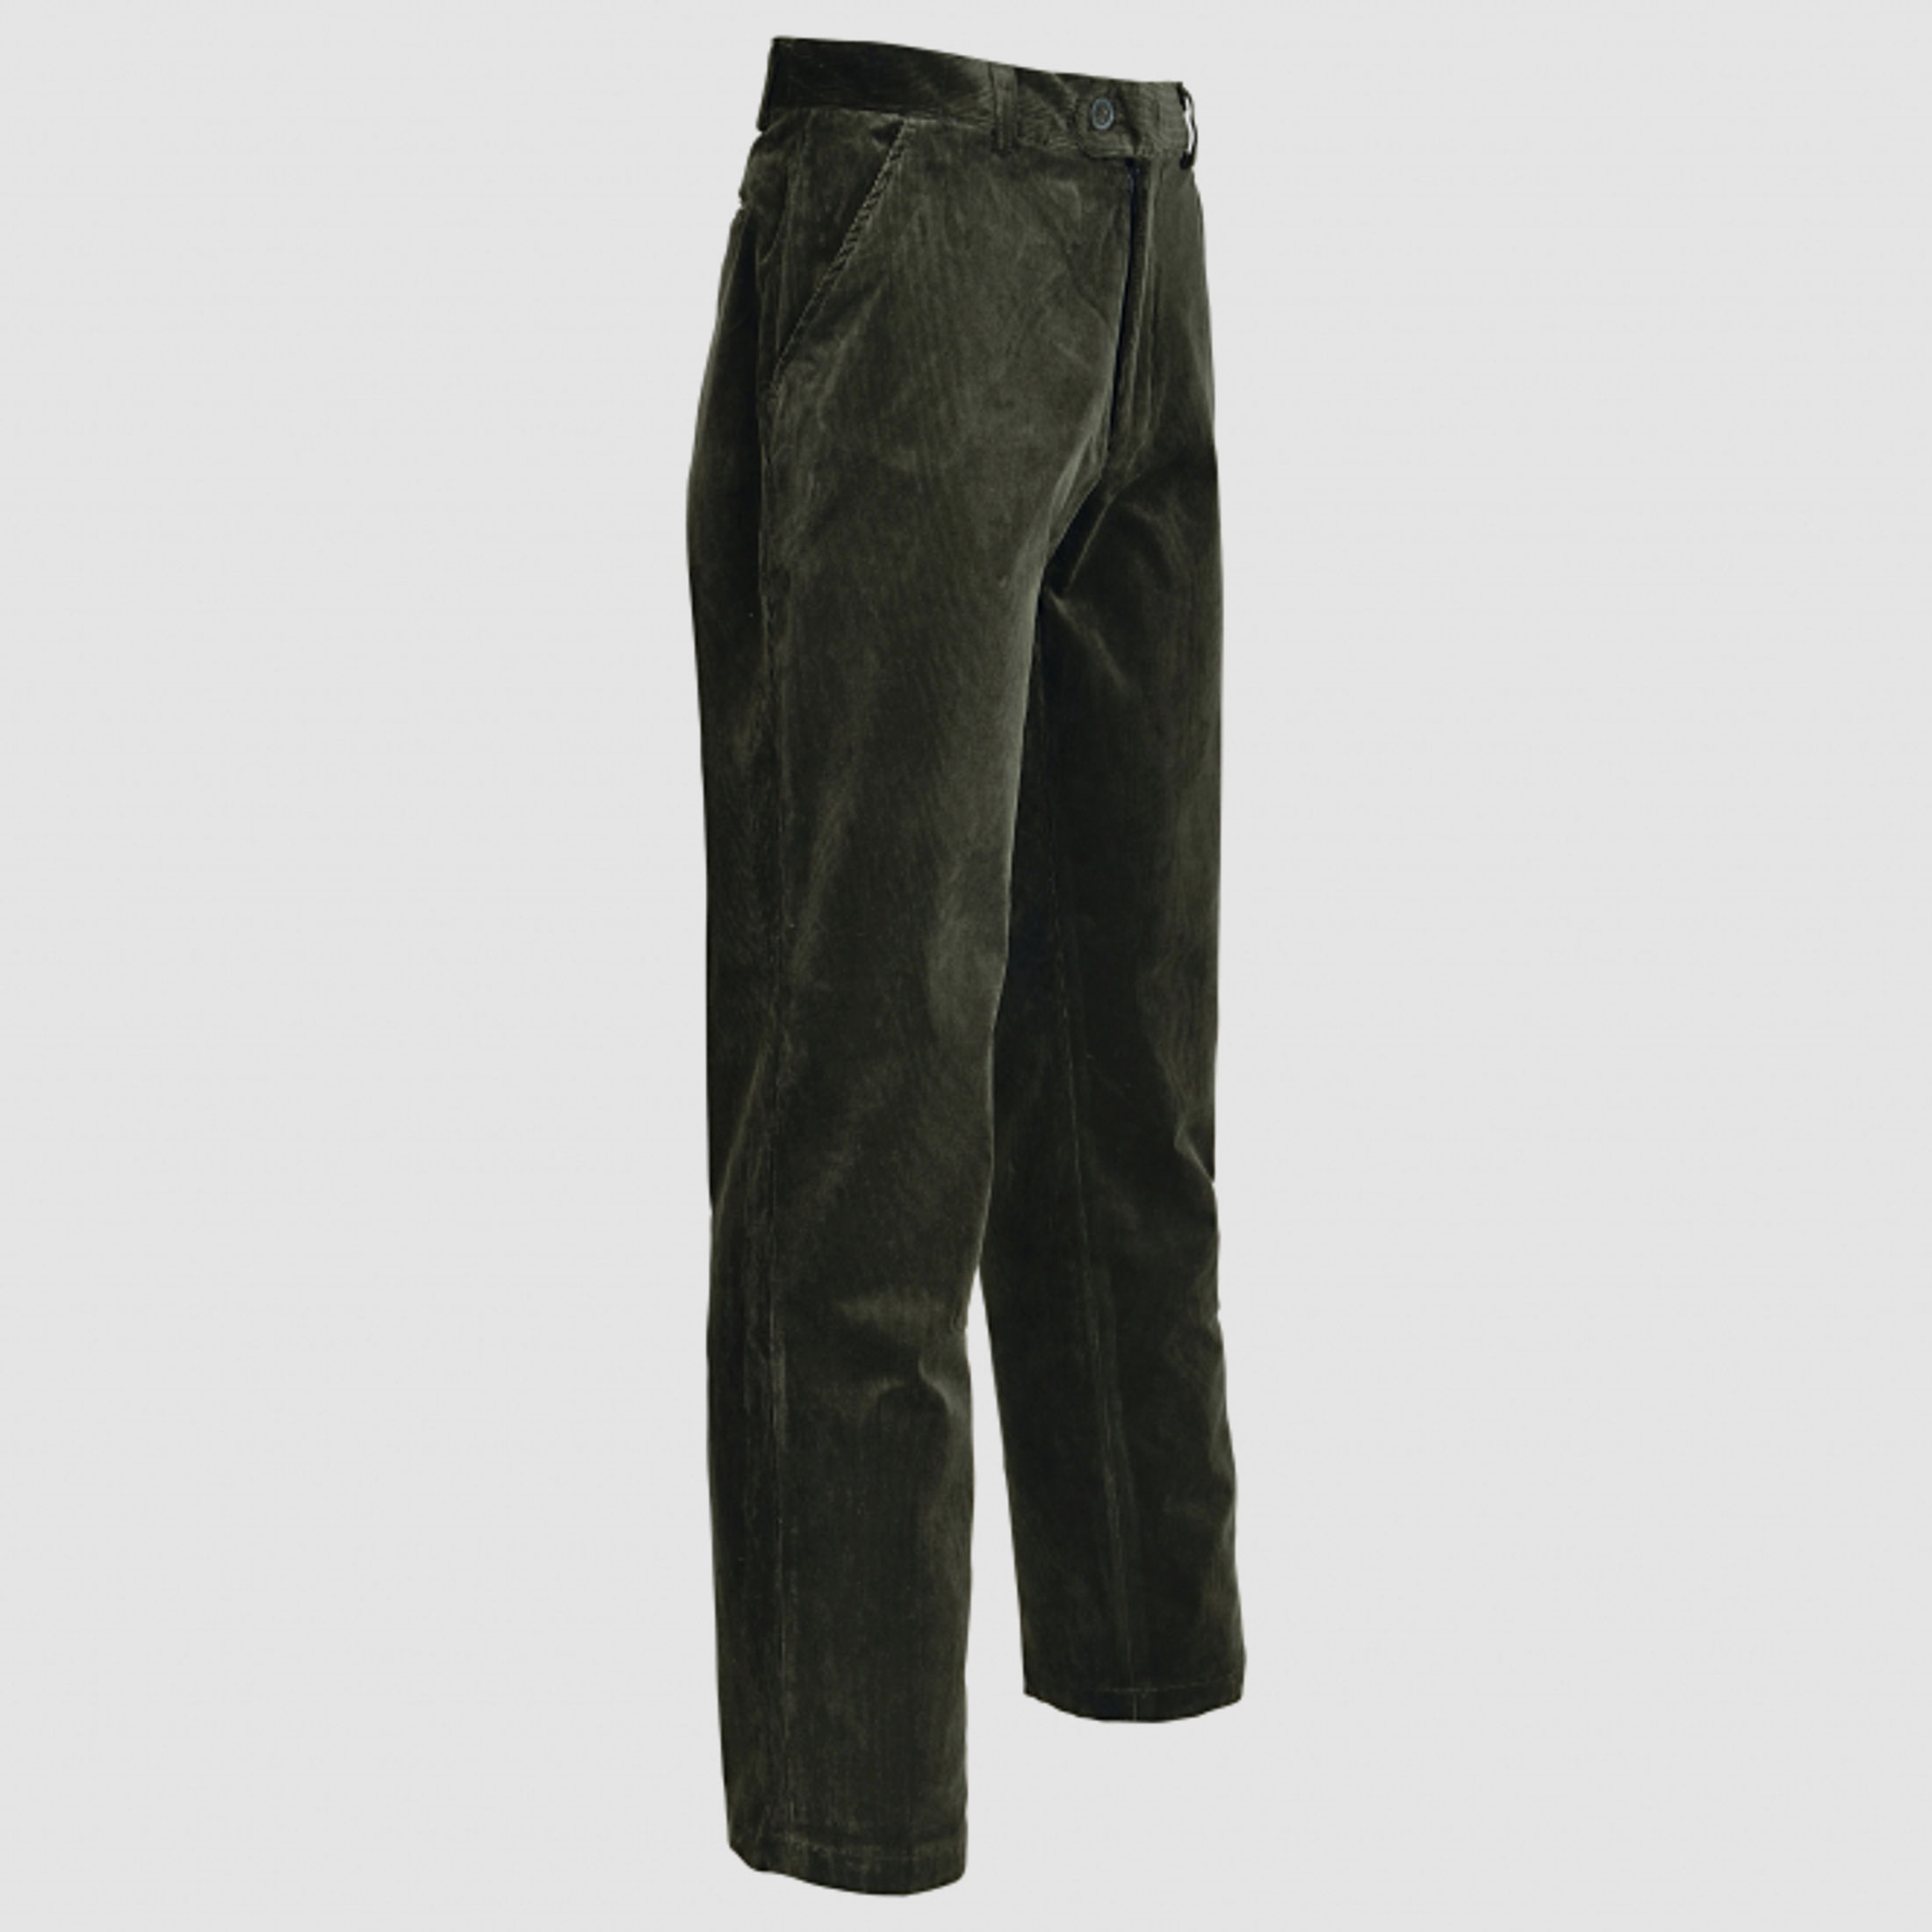 Percussion       Percussion   Herren Kordhose Country